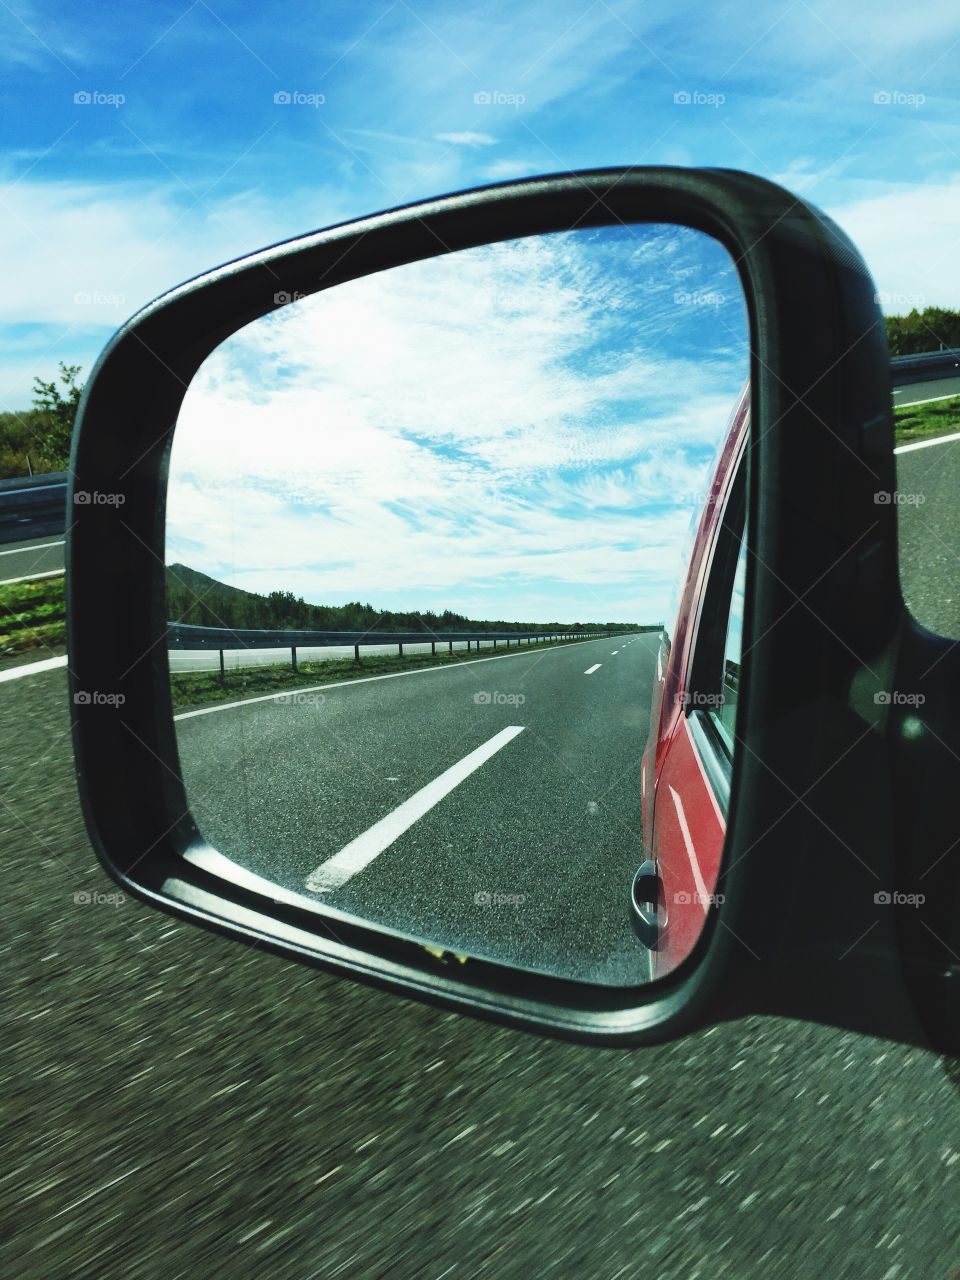 Rearview mirror viewpoint